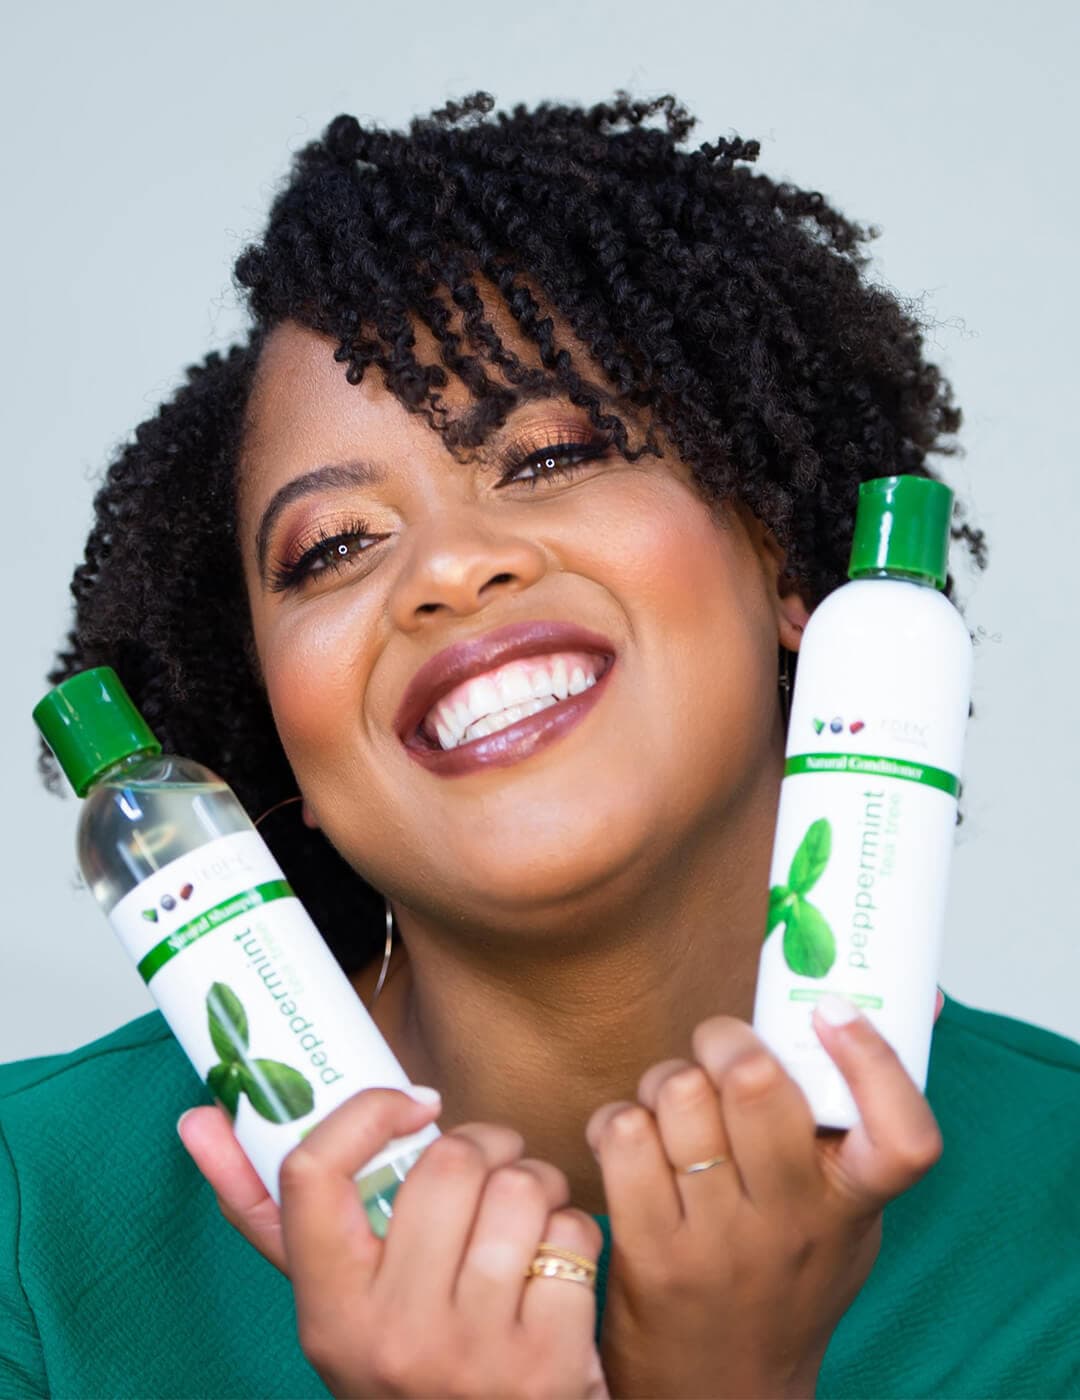 EDEN BODYWORKS founder Jasmine Lawrence posing and holding two bottles of products